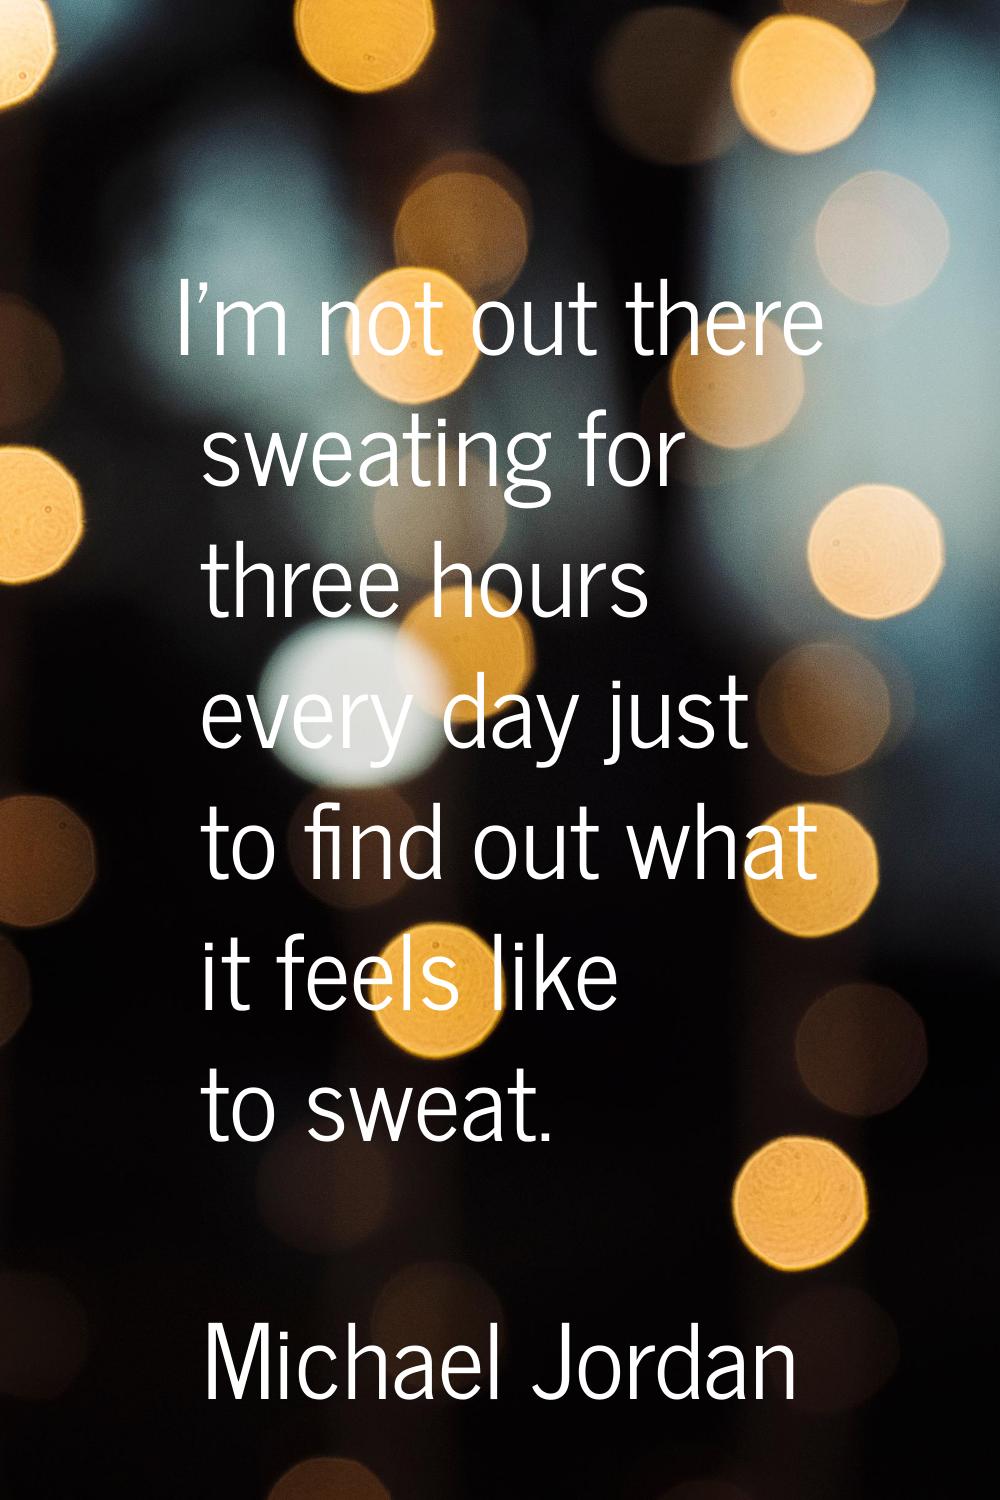 I'm not out there sweating for three hours every day just to find out what it feels like to sweat.